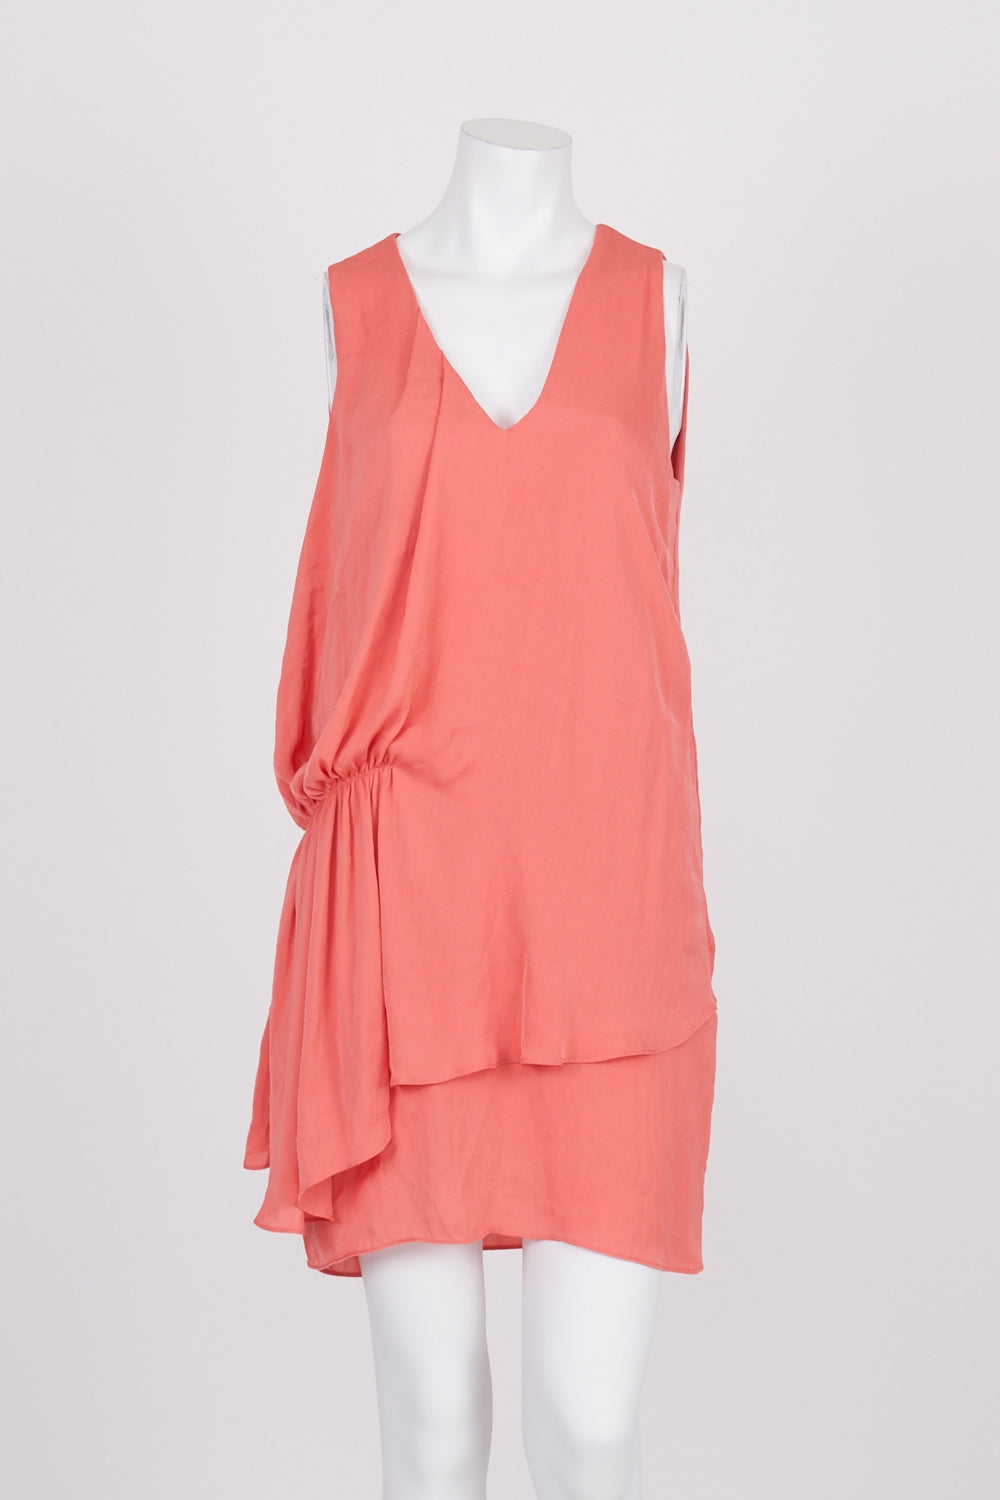 ZARA Coral Ruched Side Dress S